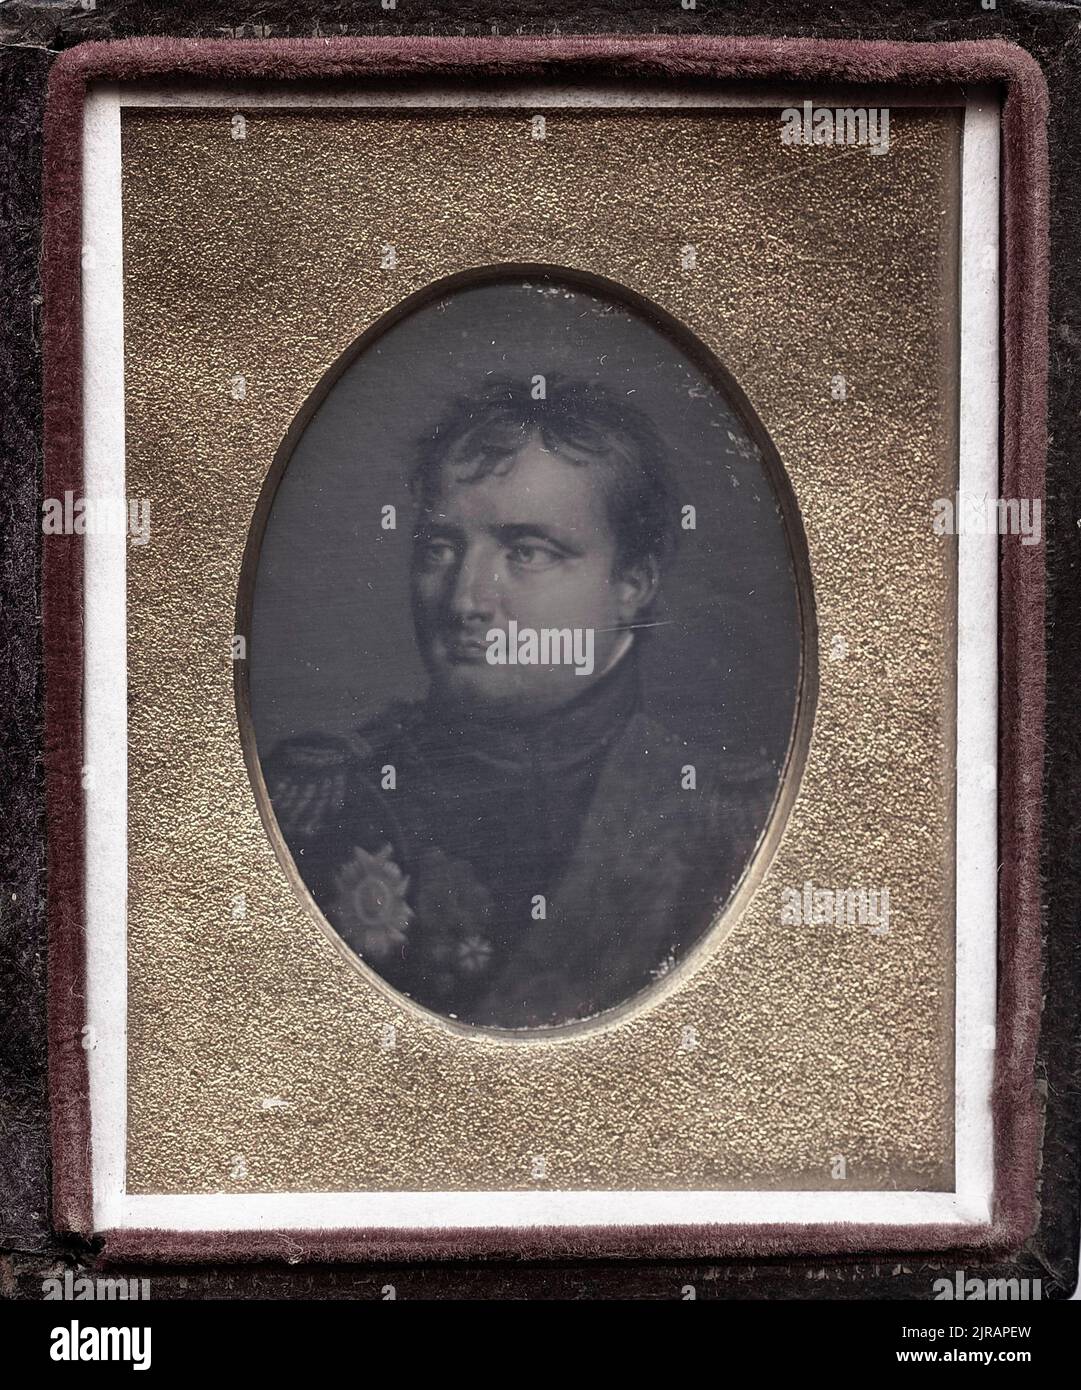 Daguerreotype of a portrait of French military and political leader Napoleon Bonaparte (1769 - 1821), circa 1855. Stock Photo